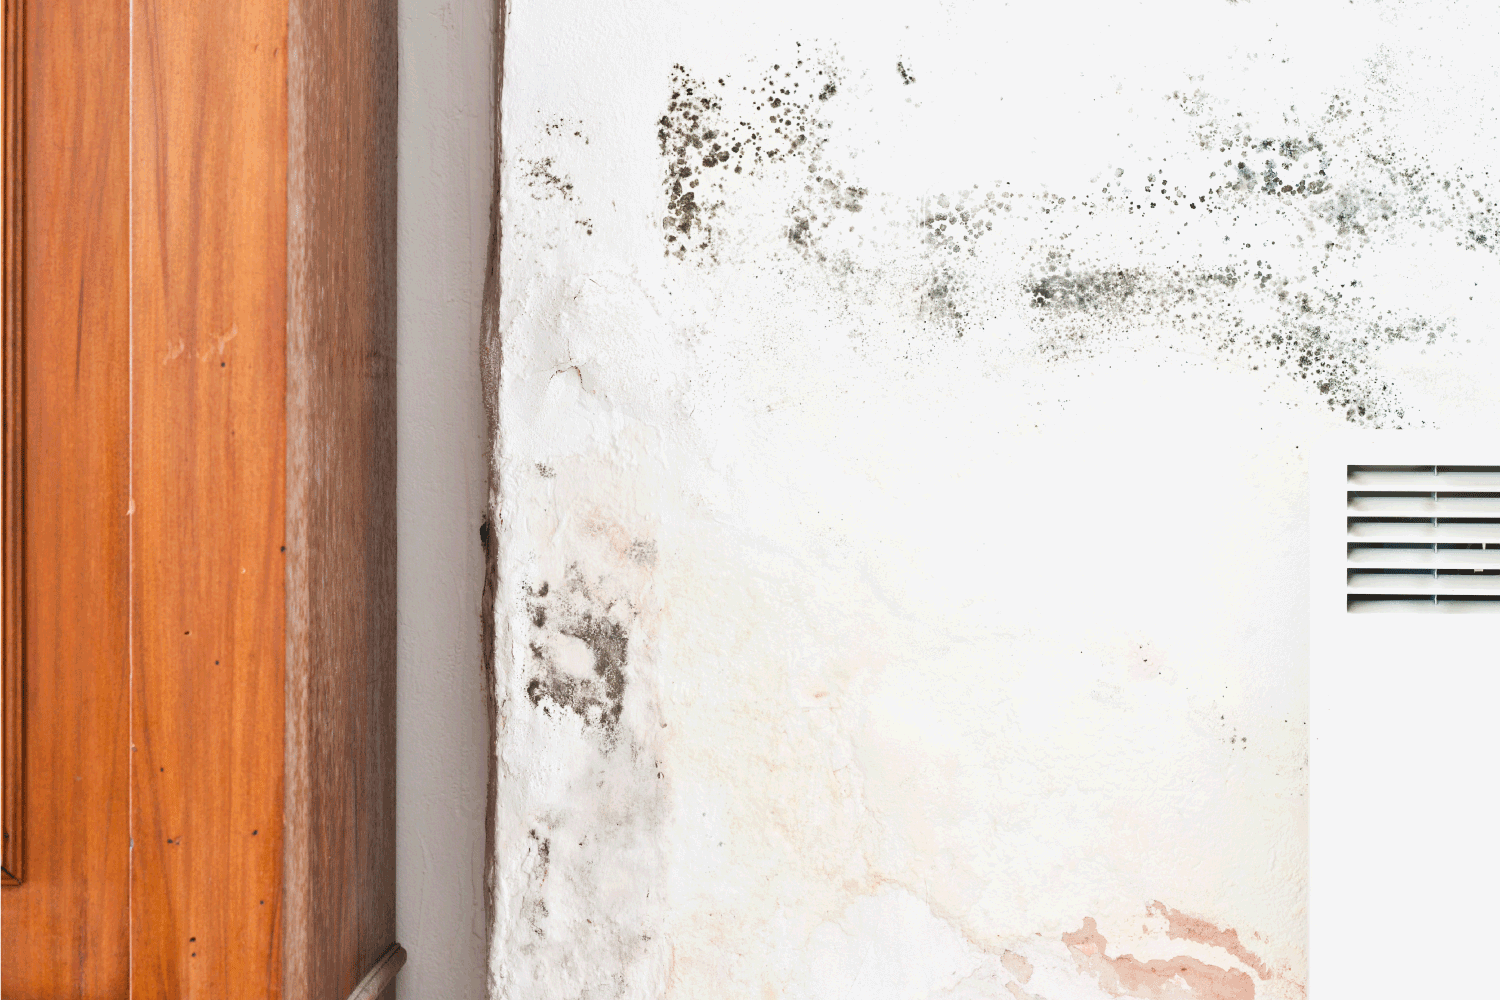 Rising Damp and Mildew or Mold on Wall with Wooden Furniture and Radiator